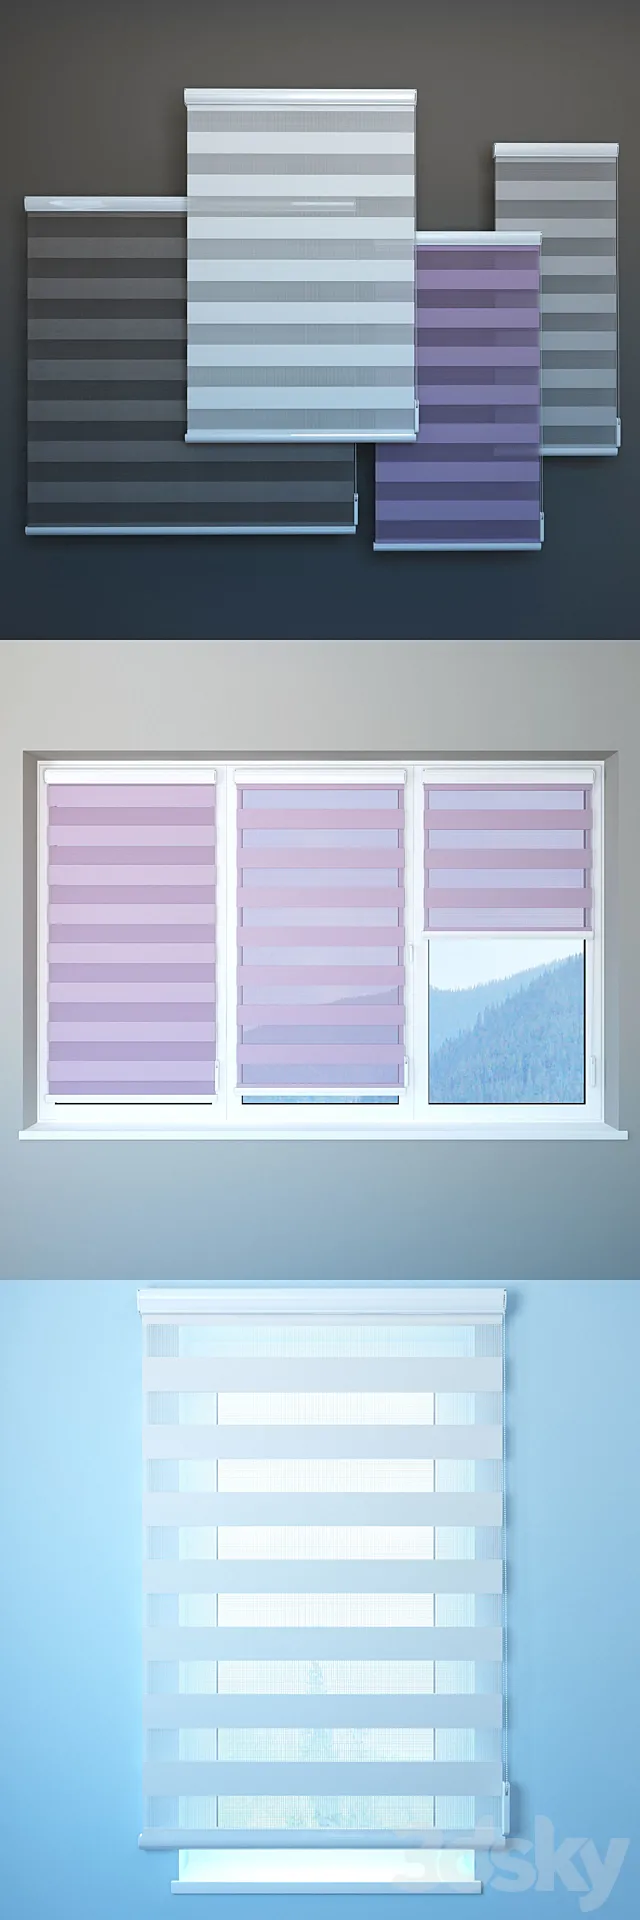 Blinds “Day and Night” 3DSMax File